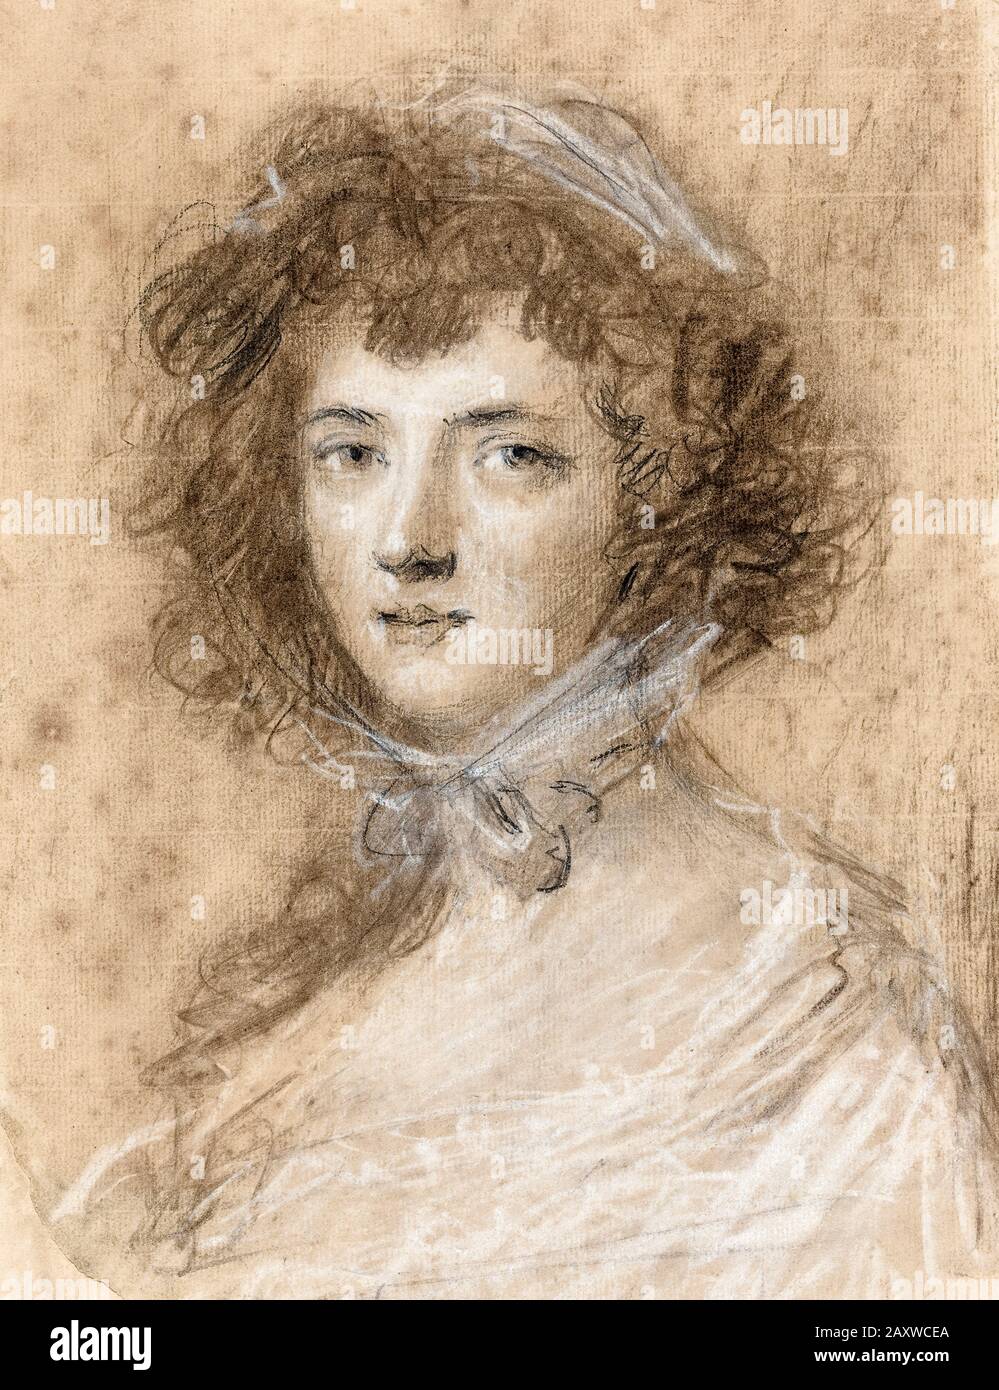 Sir Joshua Reynolds, Head and Bust of a Woman, portrait drawing, before 1792 Stock Photo